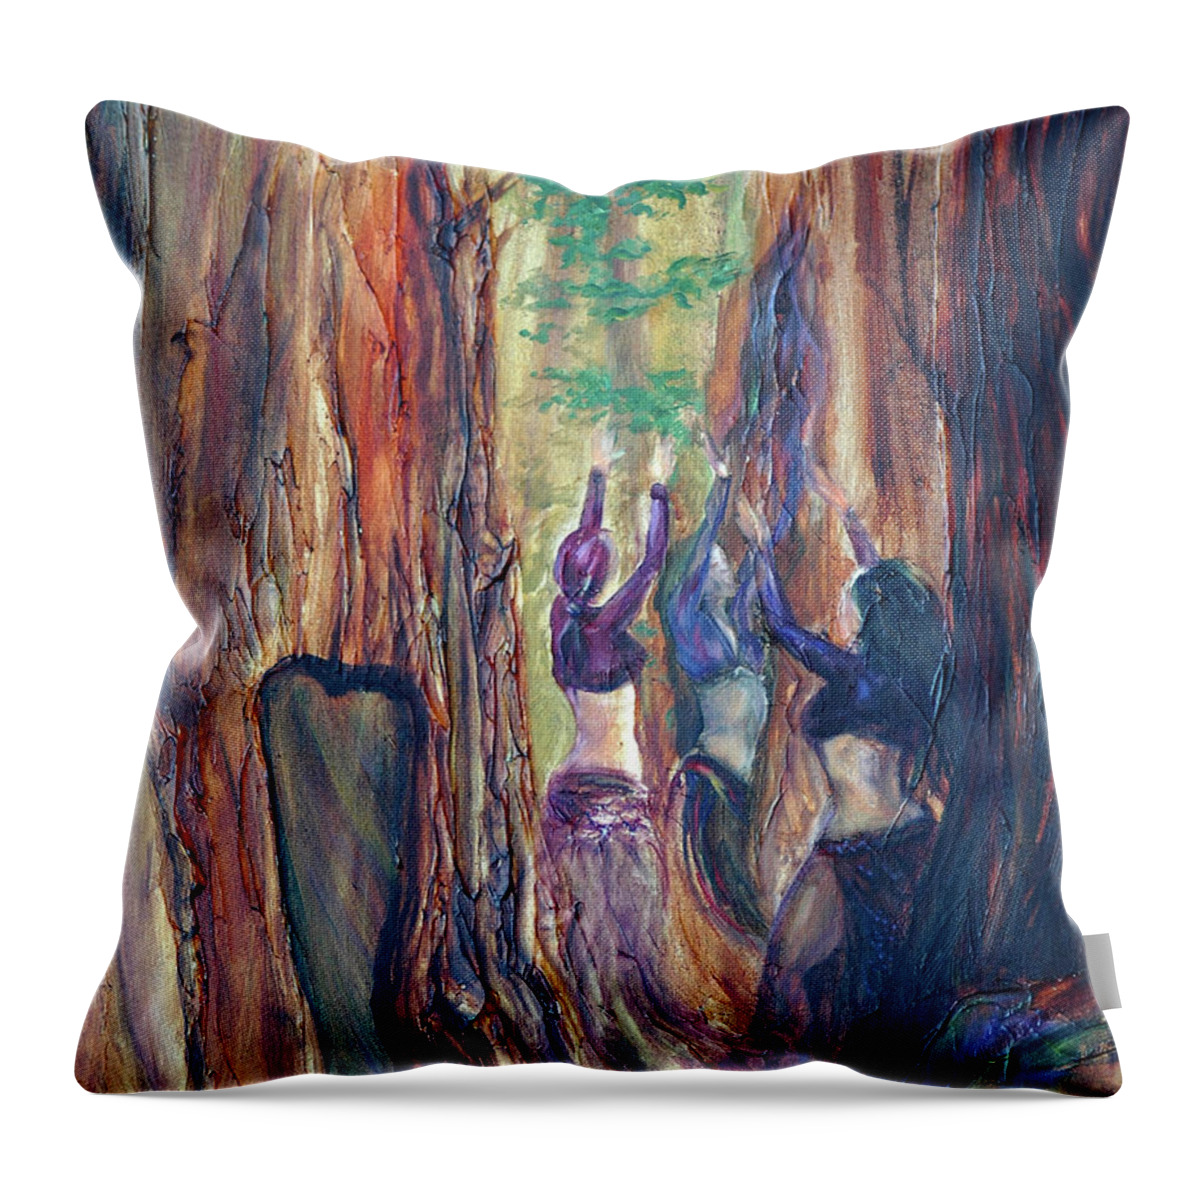 Face Mask Throw Pillow featuring the painting Forest Dancers by Sofanya White